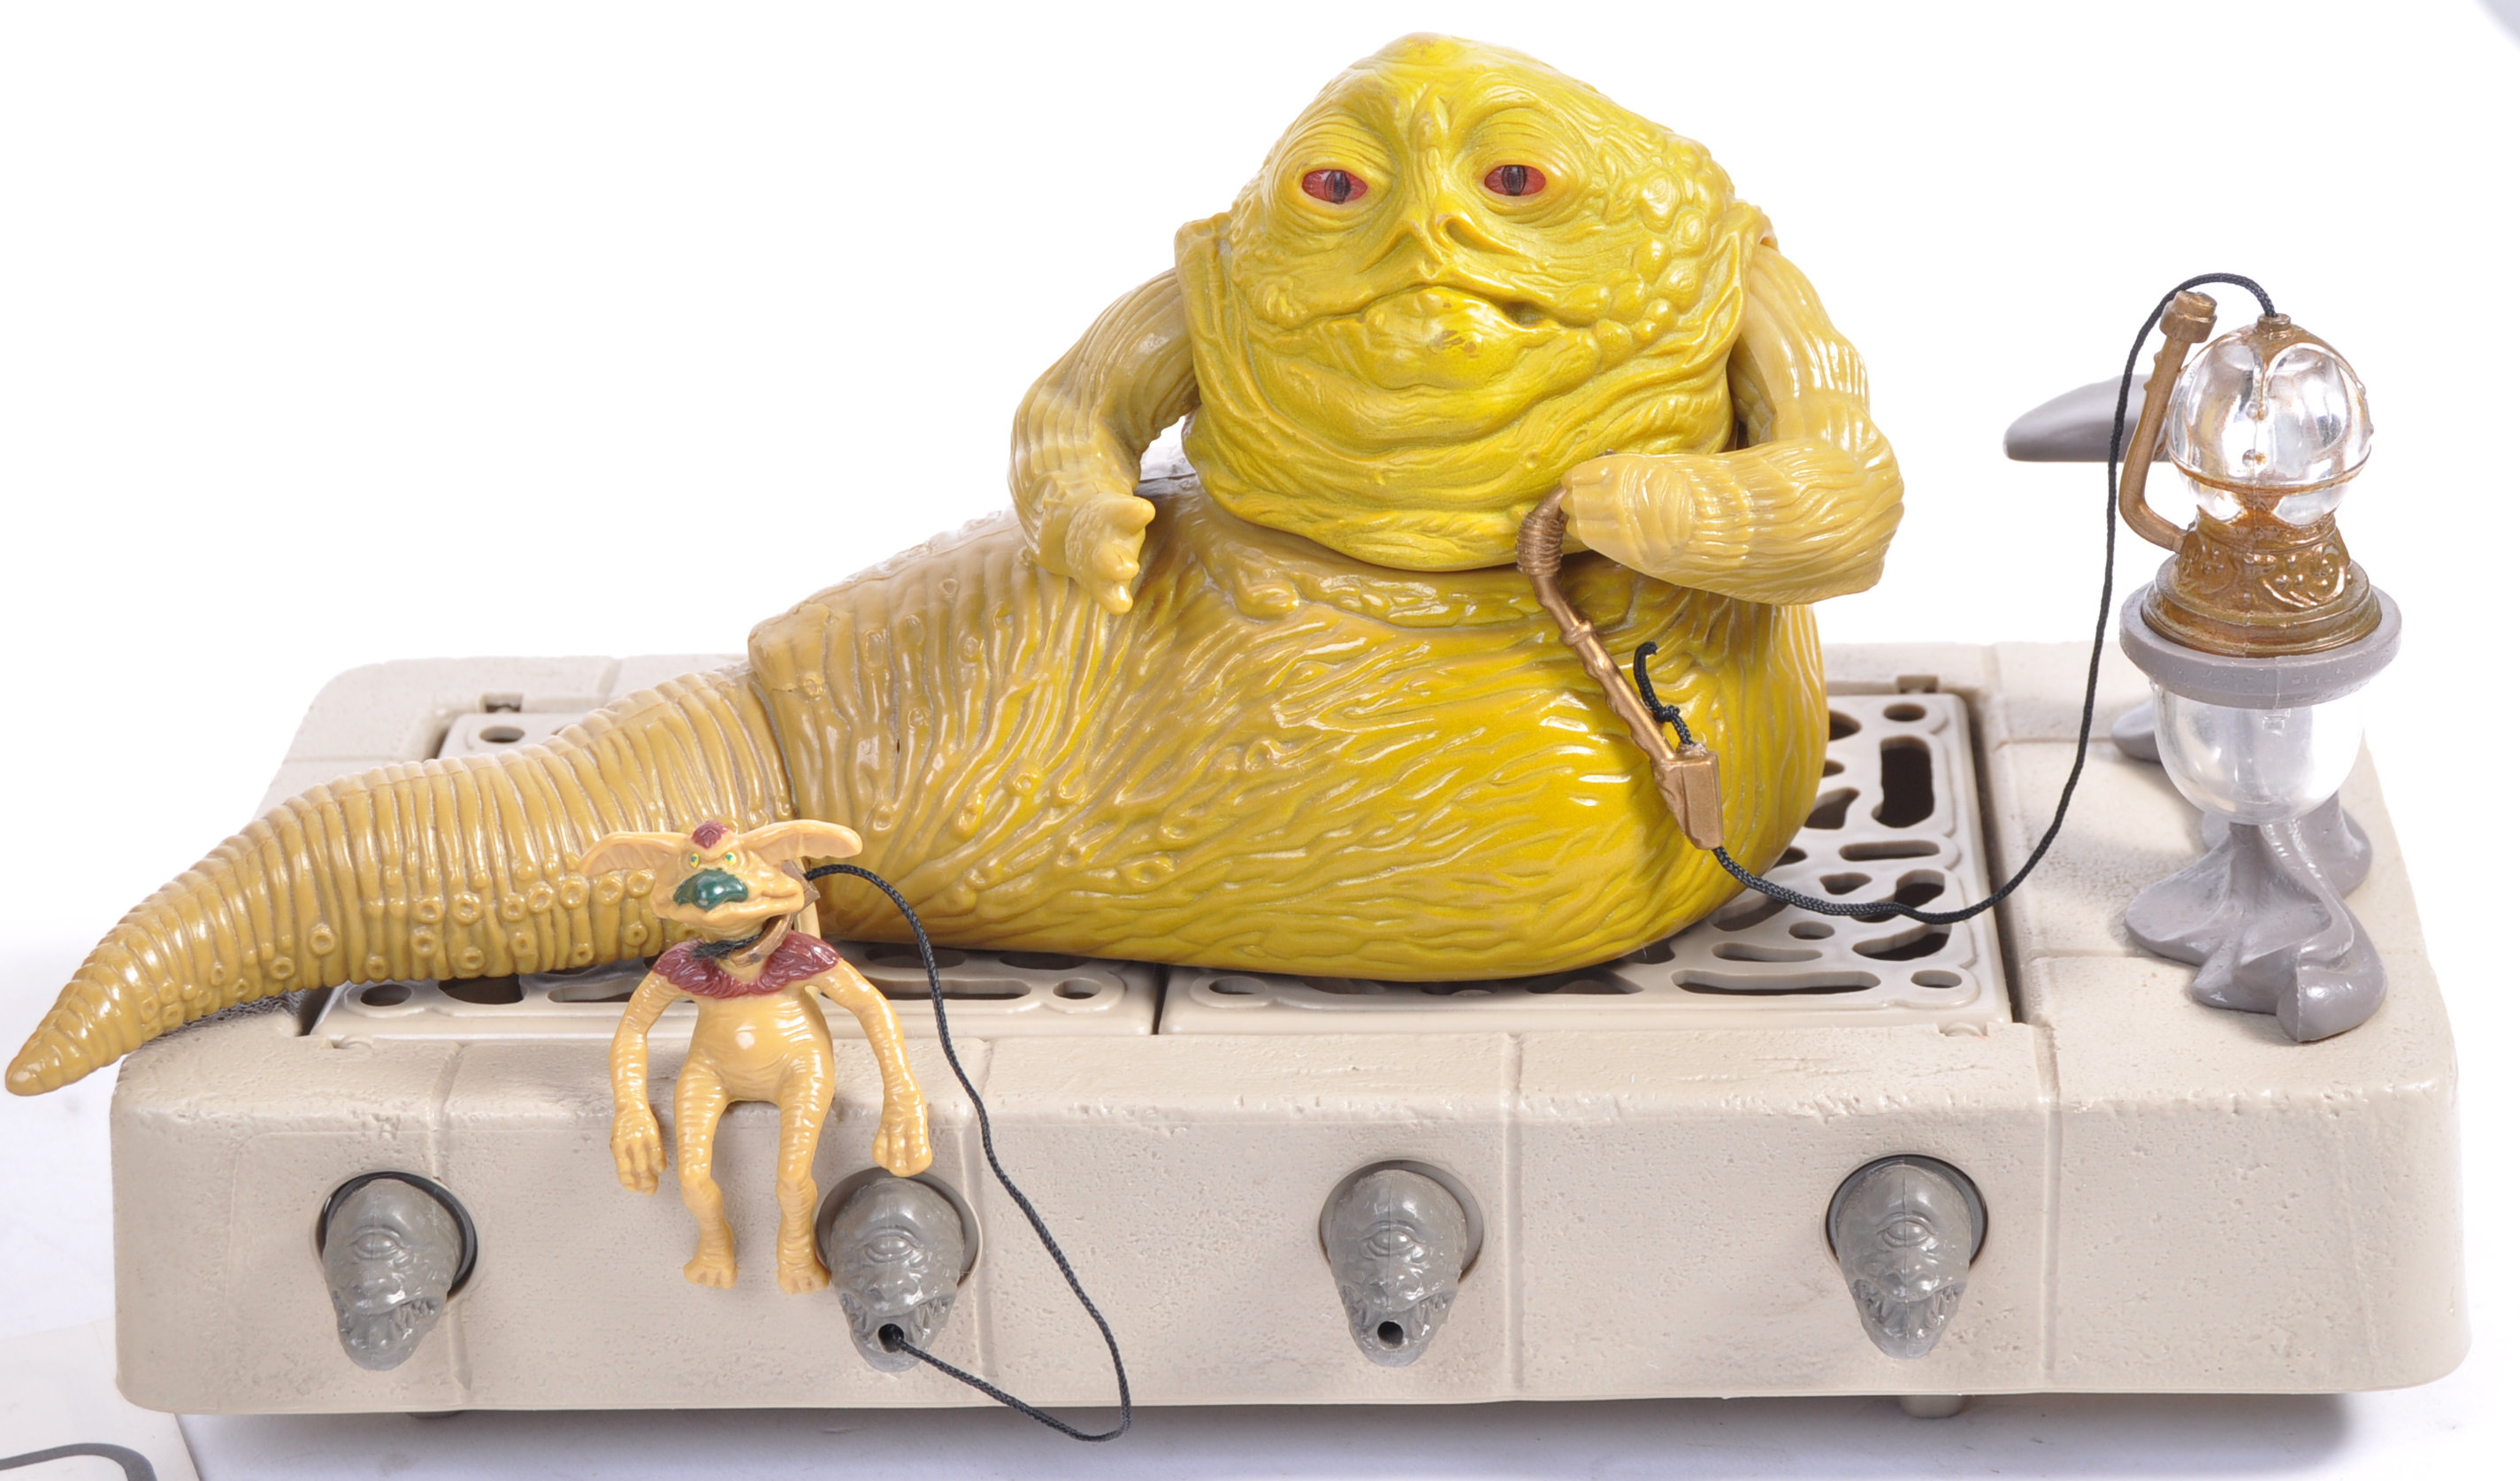 VINTAGE STAR WARS KENNER JABBA THE HUTT ACTION FIGURE PLAYSET - Image 2 of 8